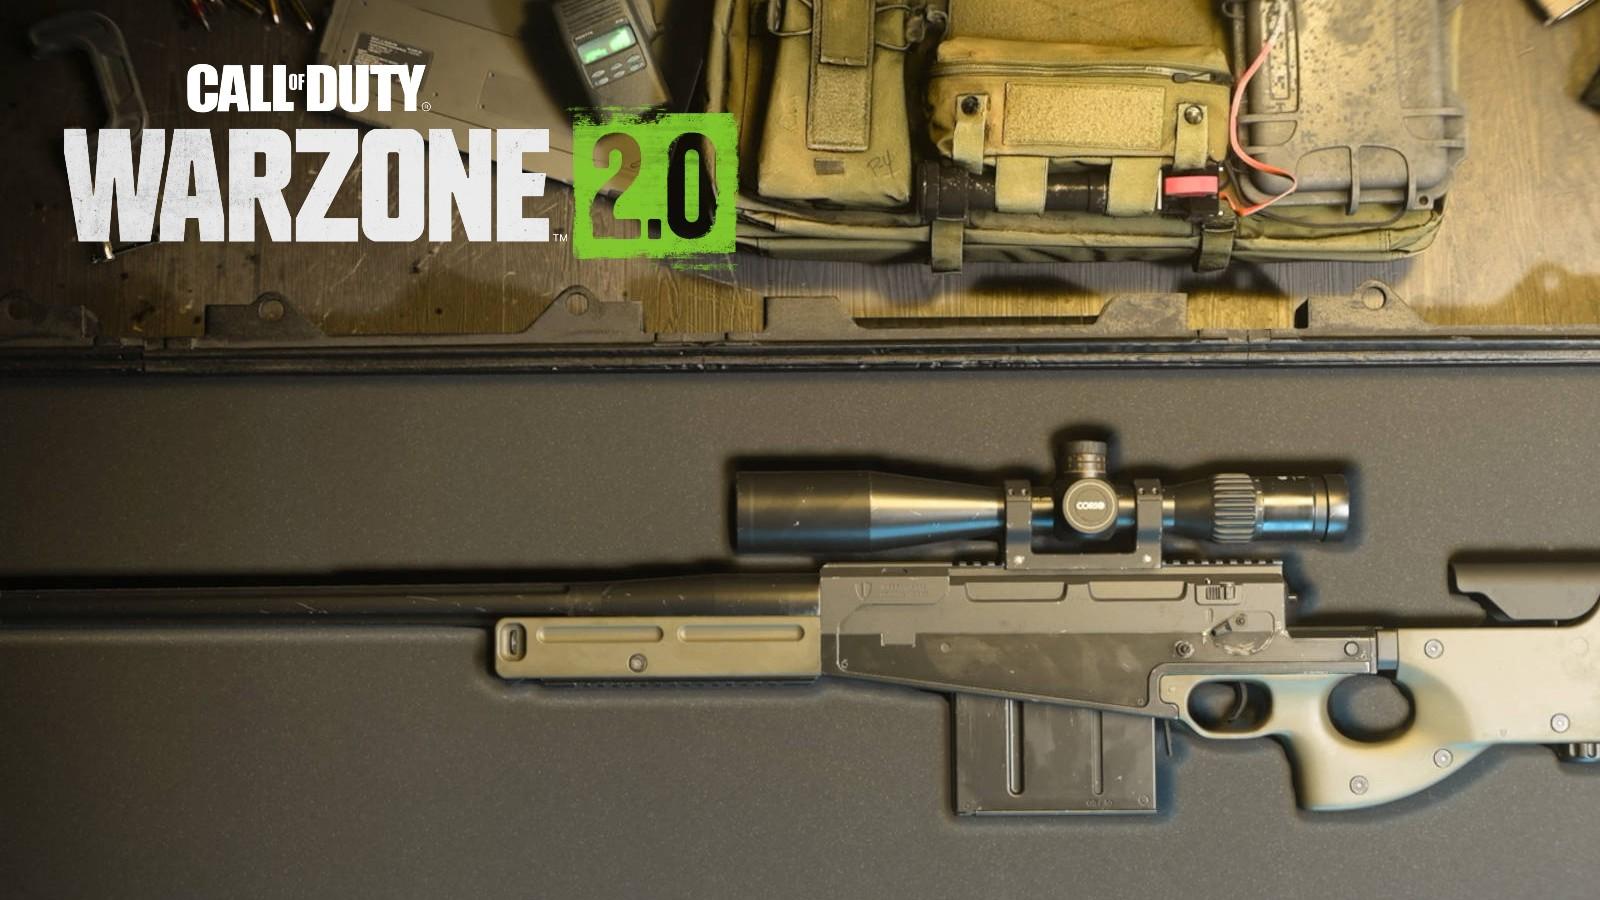 The best MCPR-300 Warzone Loadout - One shot sniper meta!